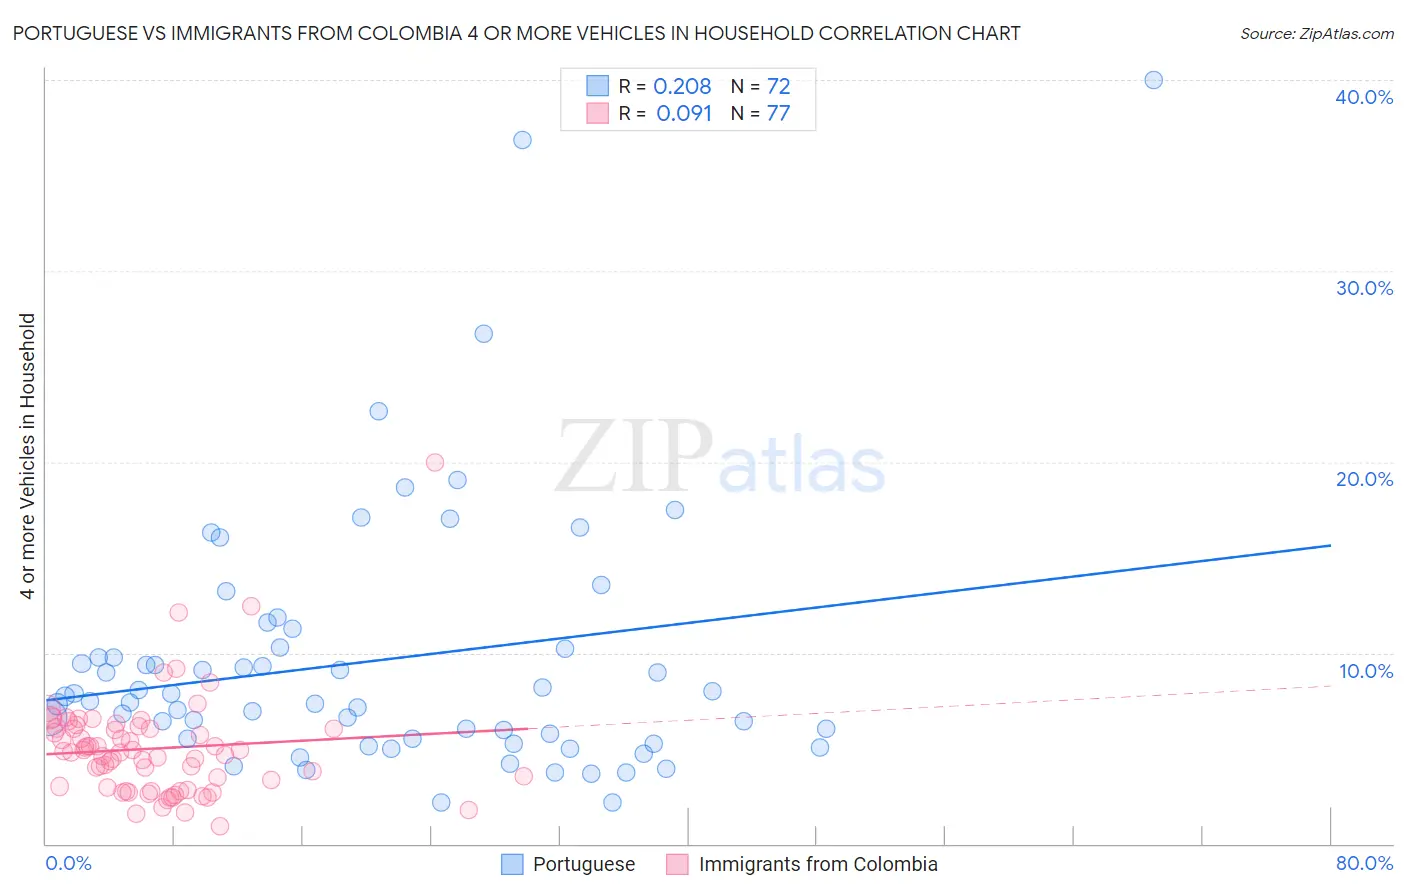 Portuguese vs Immigrants from Colombia 4 or more Vehicles in Household